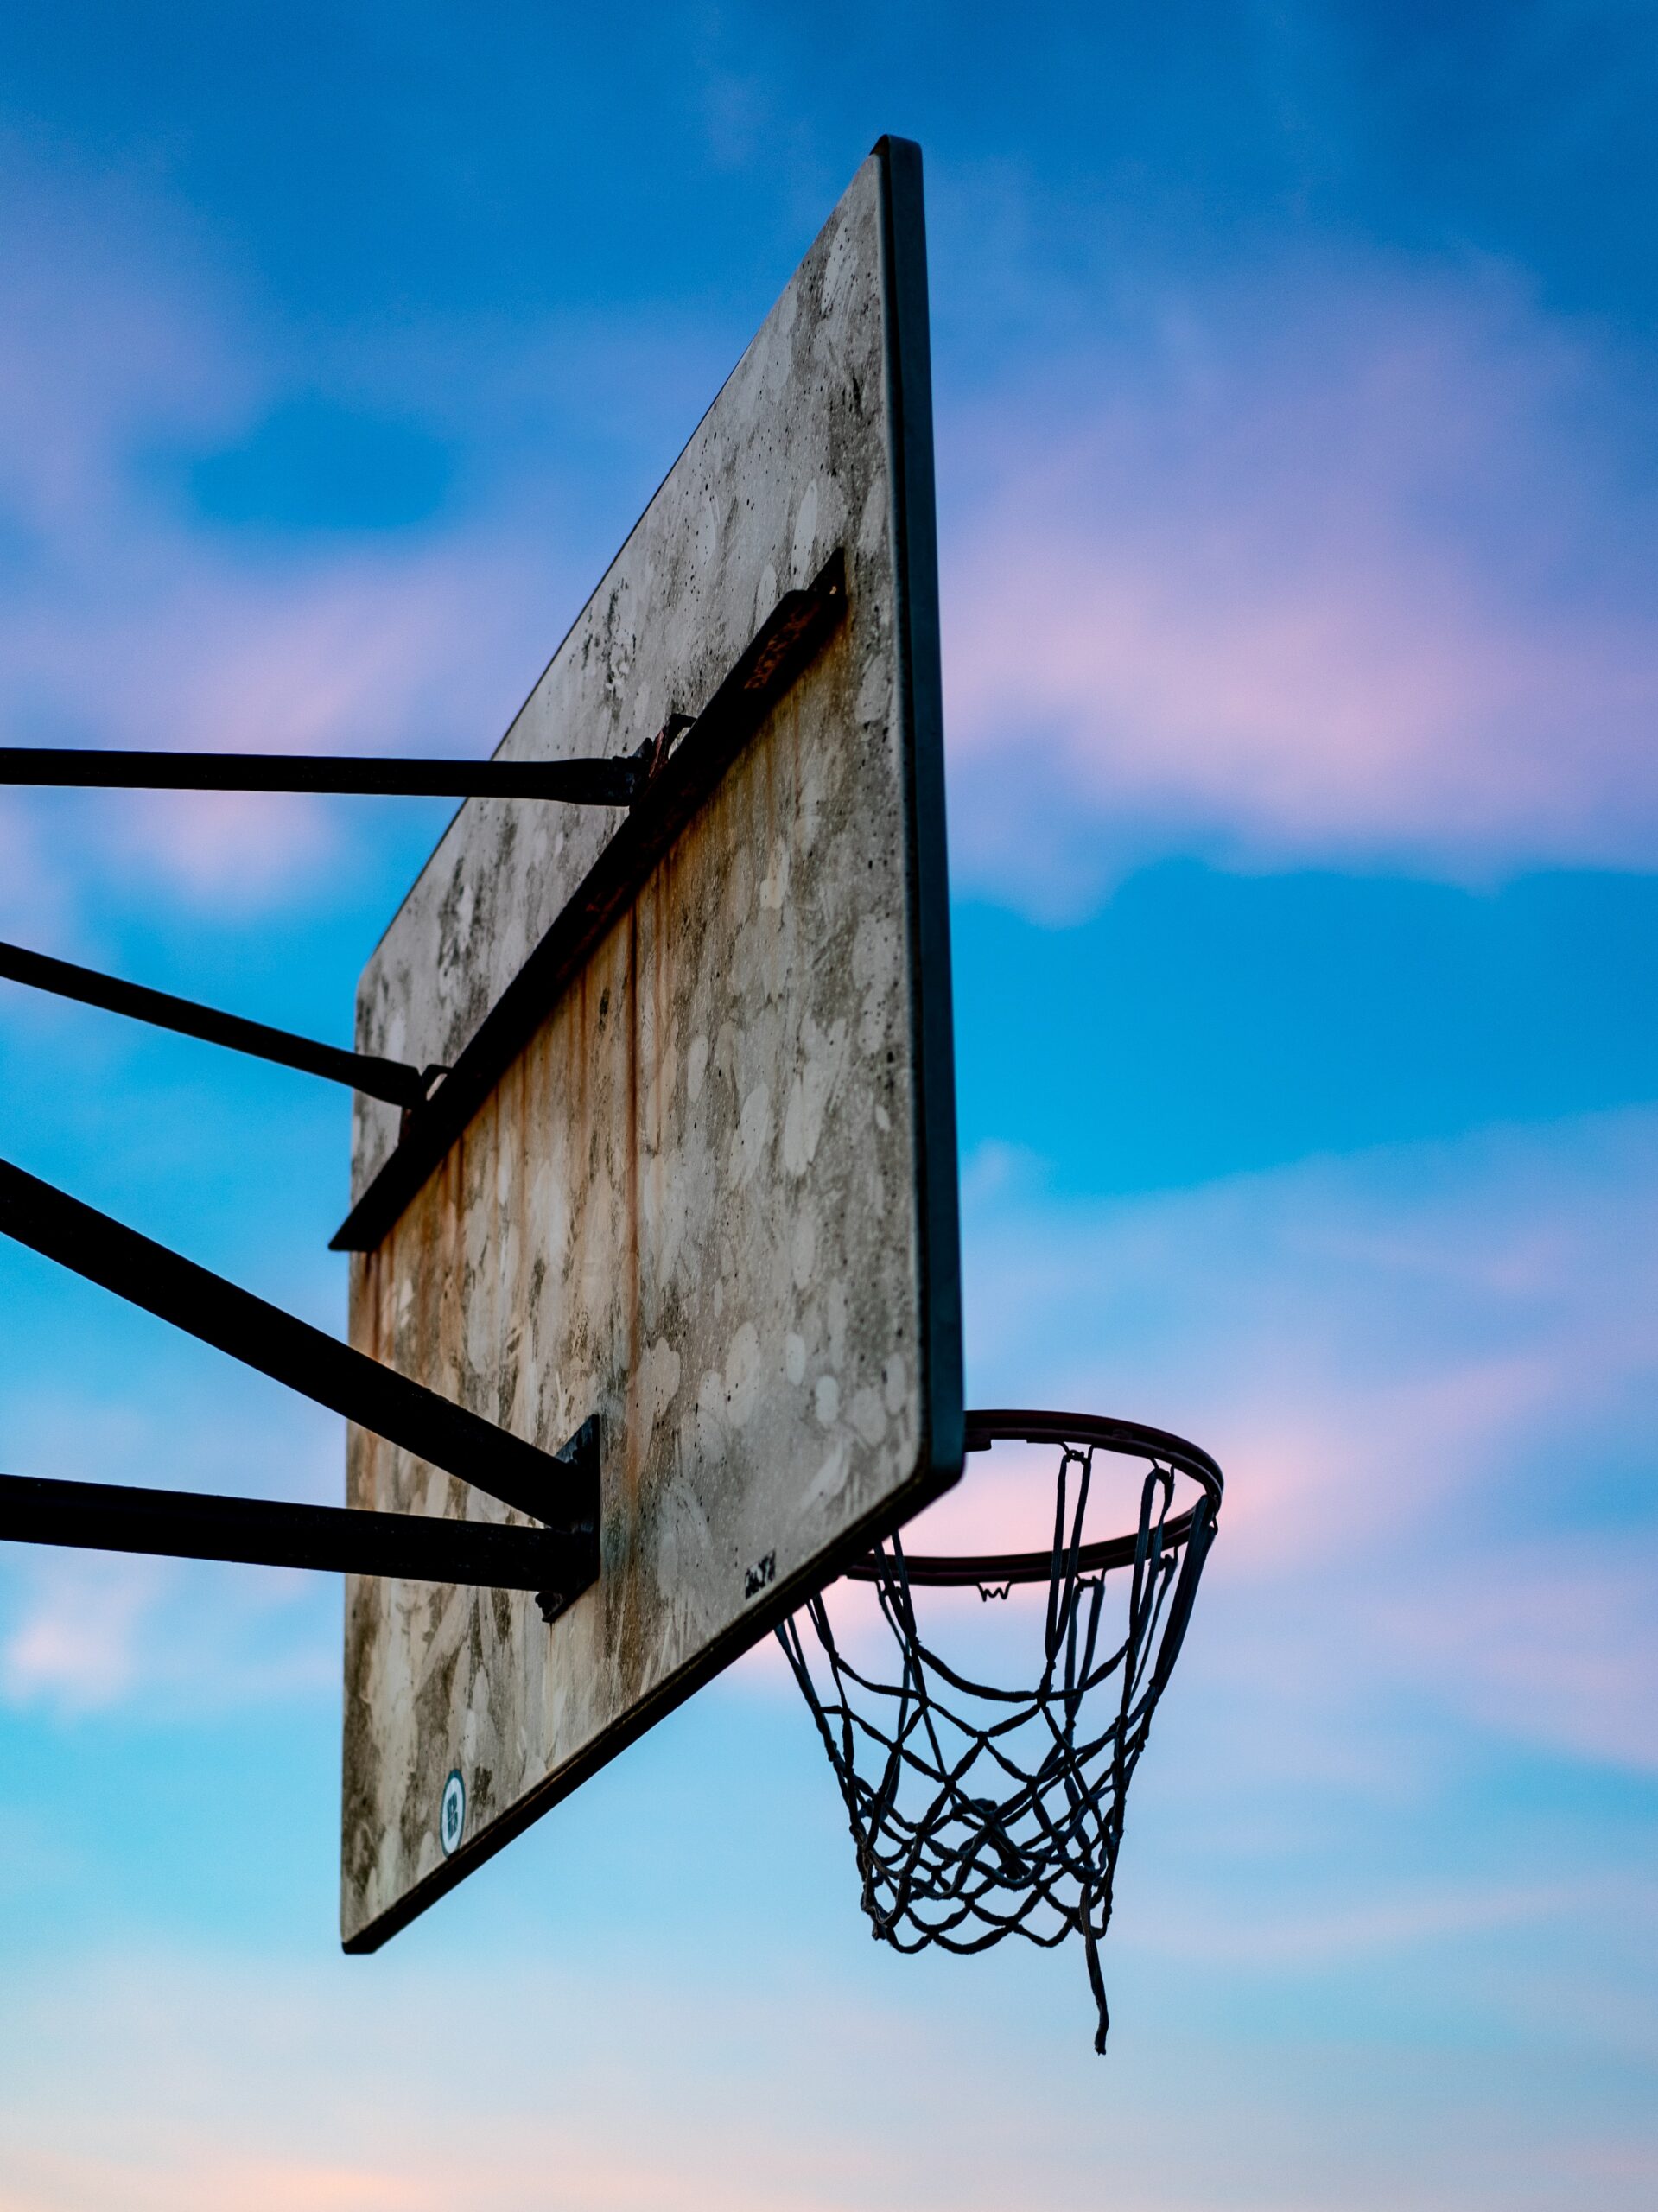 How Can I Find And Use Local Public Basketball Courts Or Sports Facilities?